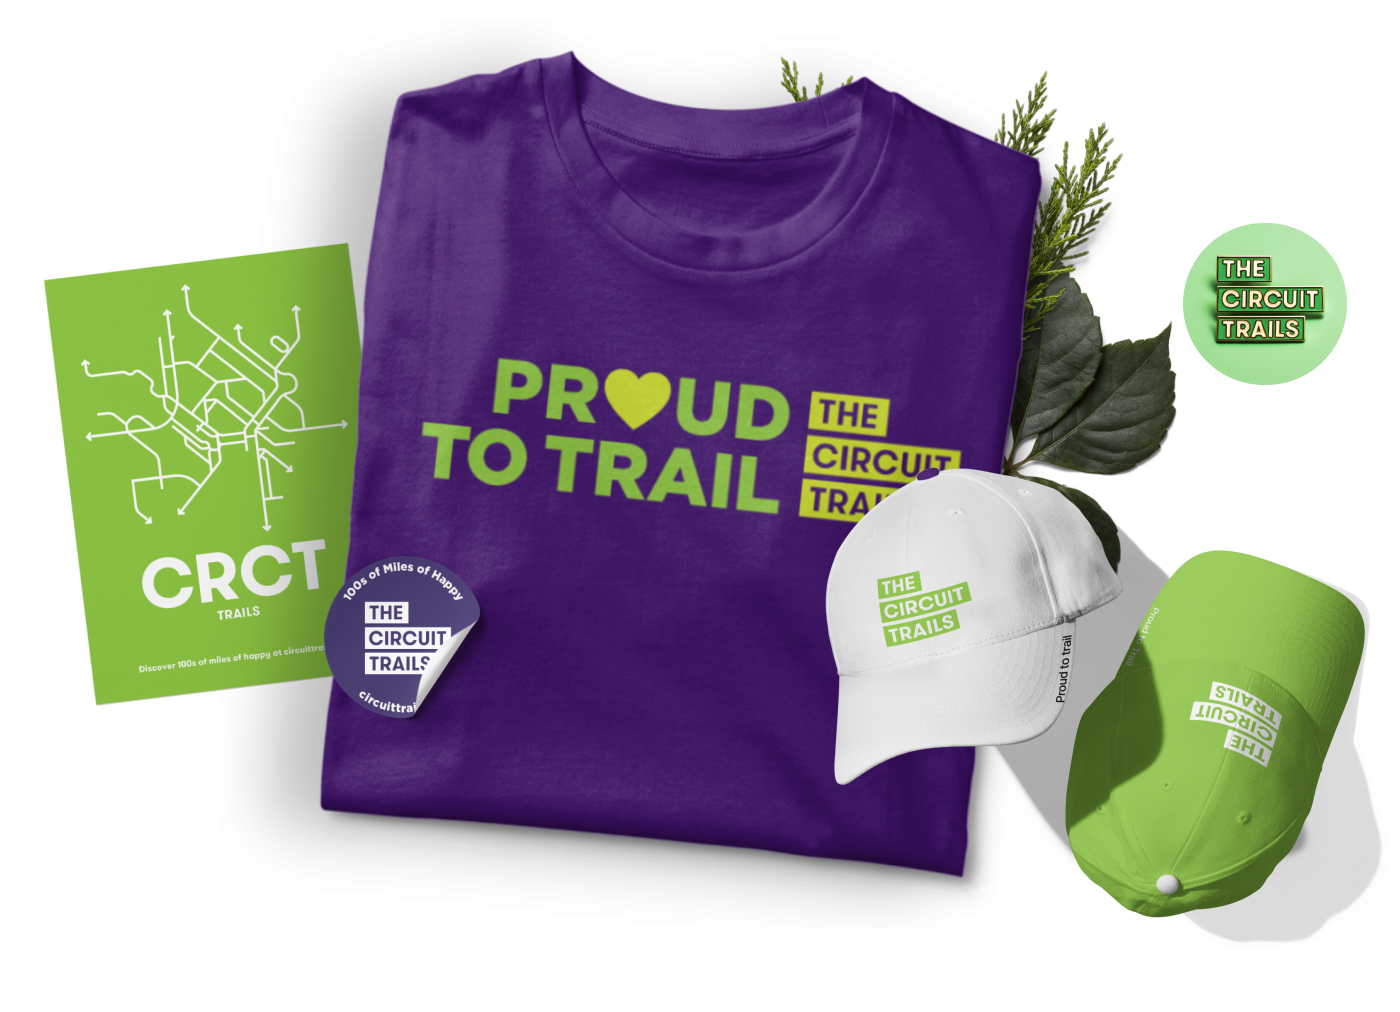 Circuit Trails Merchandise Branding on a t-shirt and hats.